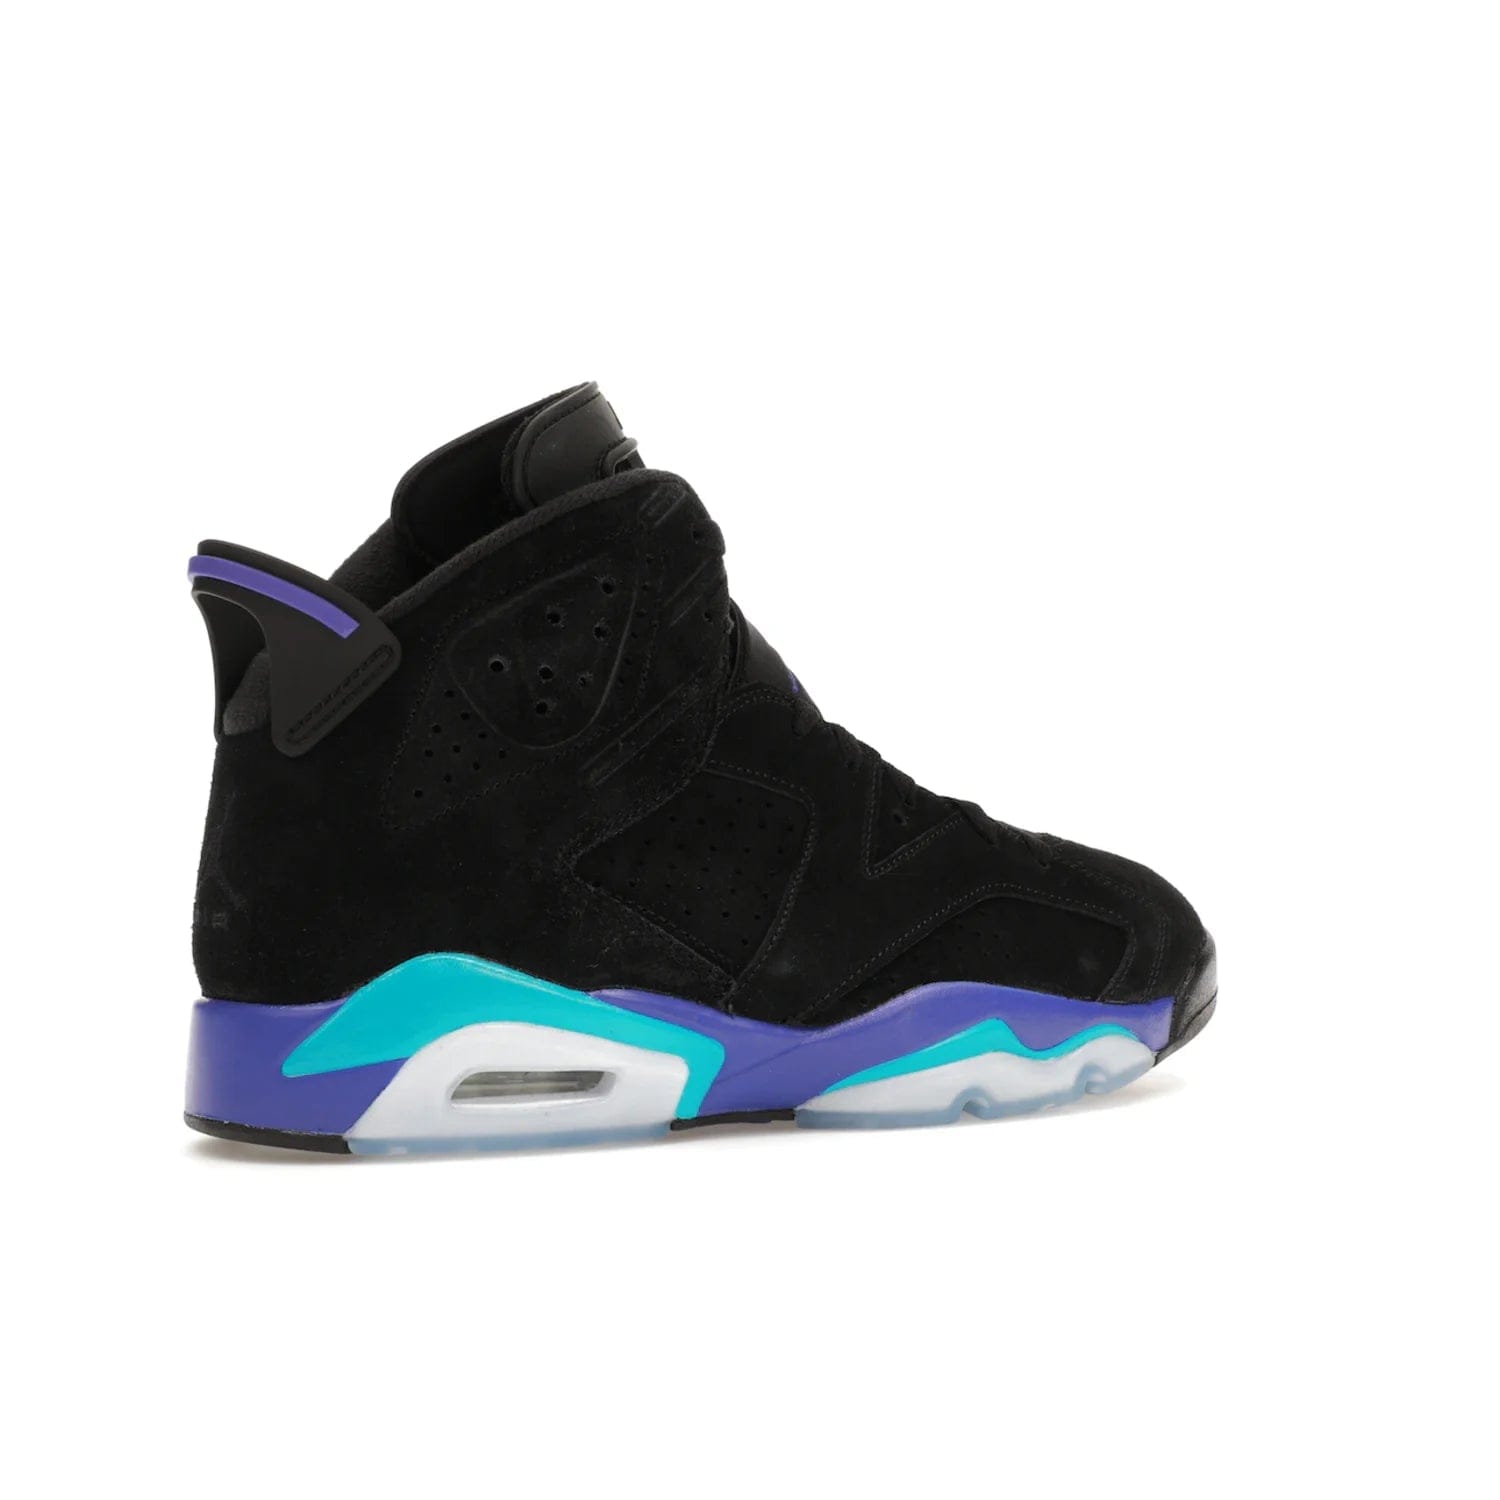 Jordan 6 Retro Aqua - Image 34 - Only at www.BallersClubKickz.com - Feel the classic Jordan 6 Retro Aqua paired with modern style. Black, Bright Concord, and Aquatone hues are crafted with a supple suede and rubberized heel tab. This standout sneaker adds signature Jordan elements at $200. Elevate your style with the Jordan 6 Retro Aqua.